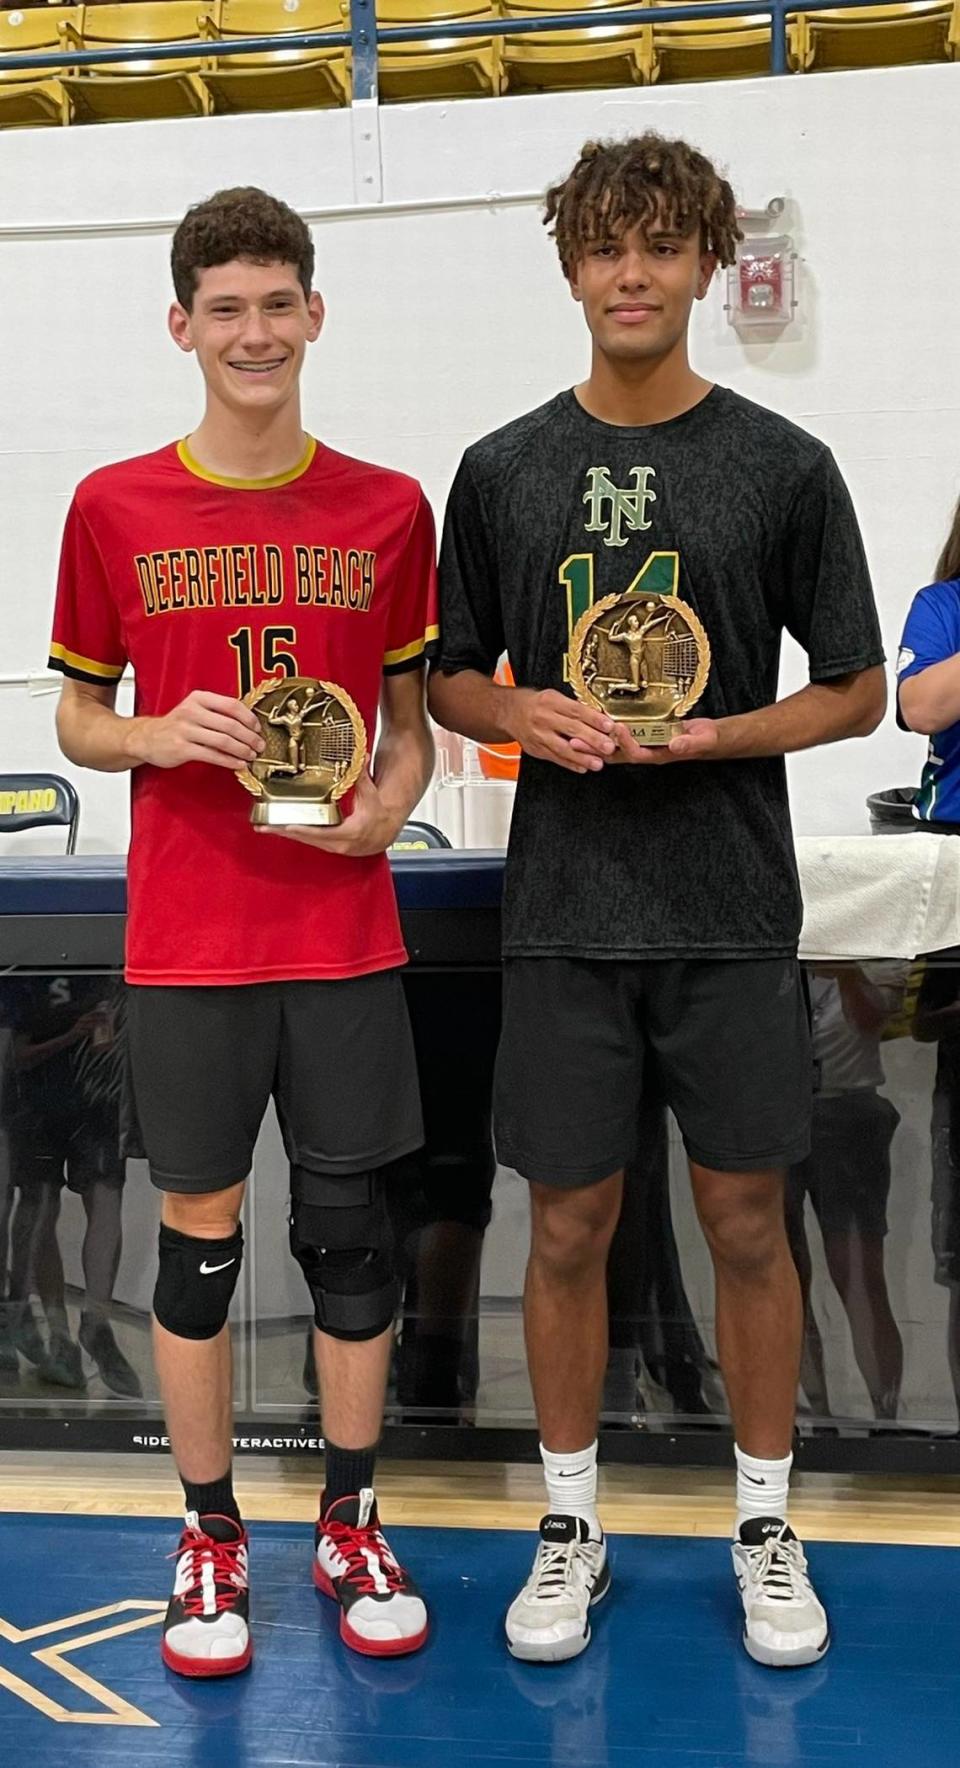 At the BCAA Boys’ Volleyball All-Star Game, the North’s Judelin Bosse from Deerfield Beach and the South’s Ryan Celestine from Nova were named team MVPs. Photo Via BCAA Sports Twitter